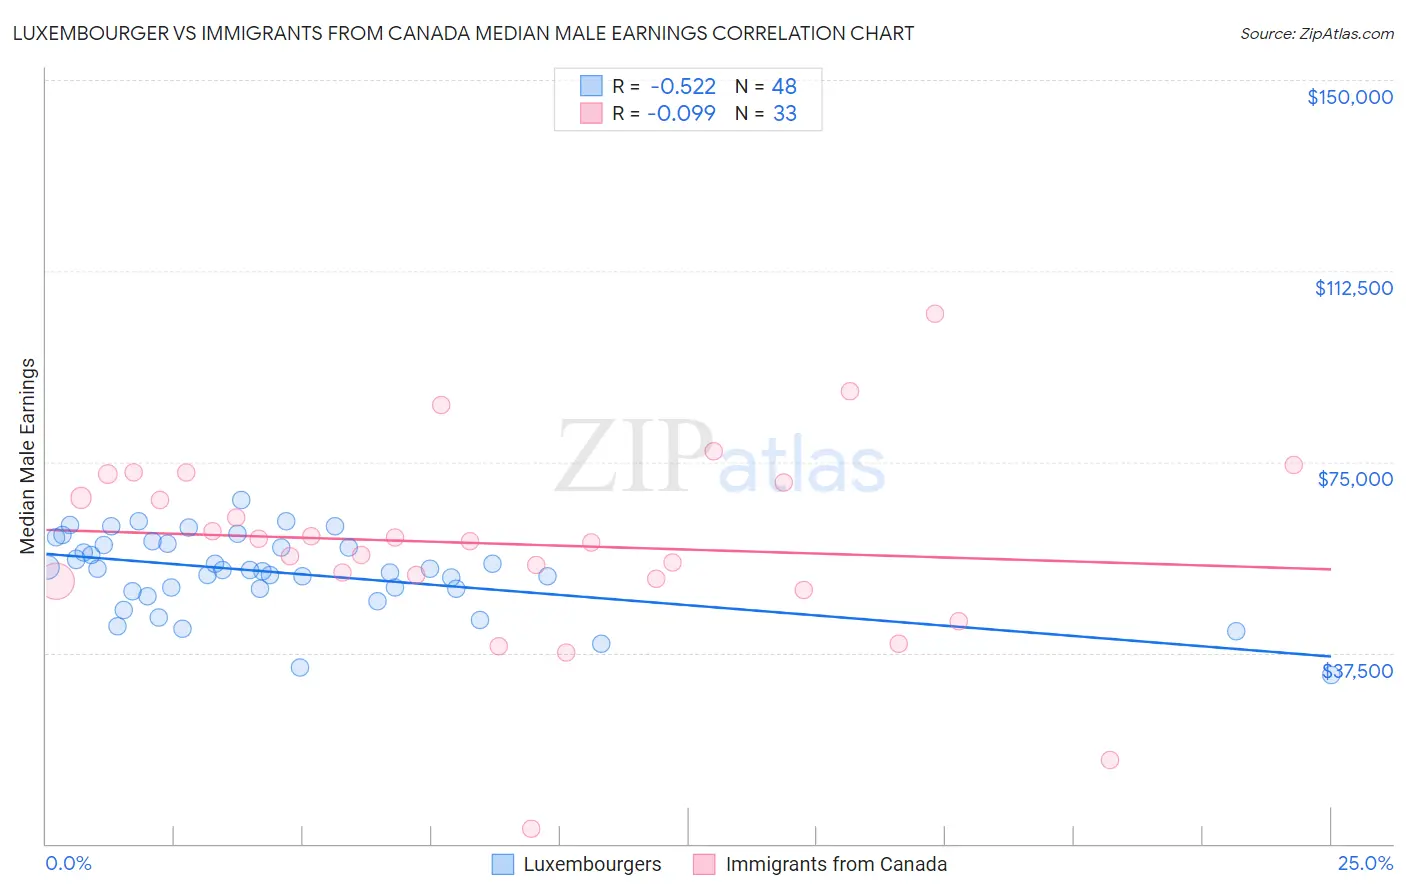 Luxembourger vs Immigrants from Canada Median Male Earnings